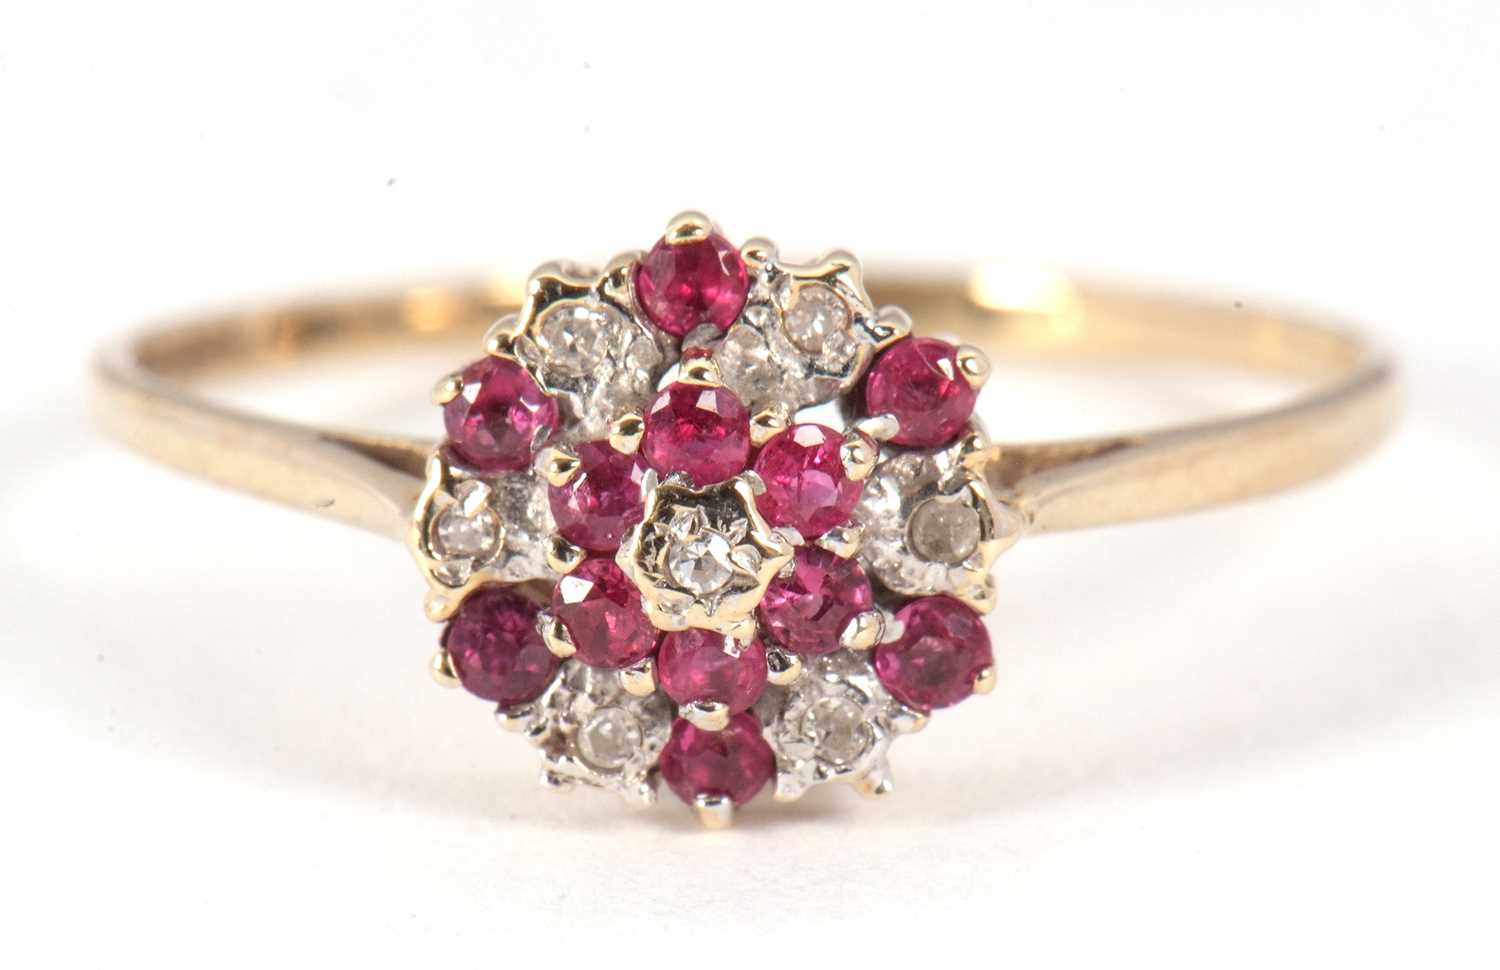 A 9ct pink stone and diamond cluster ring, the small round pink stones and small round diamonds in a